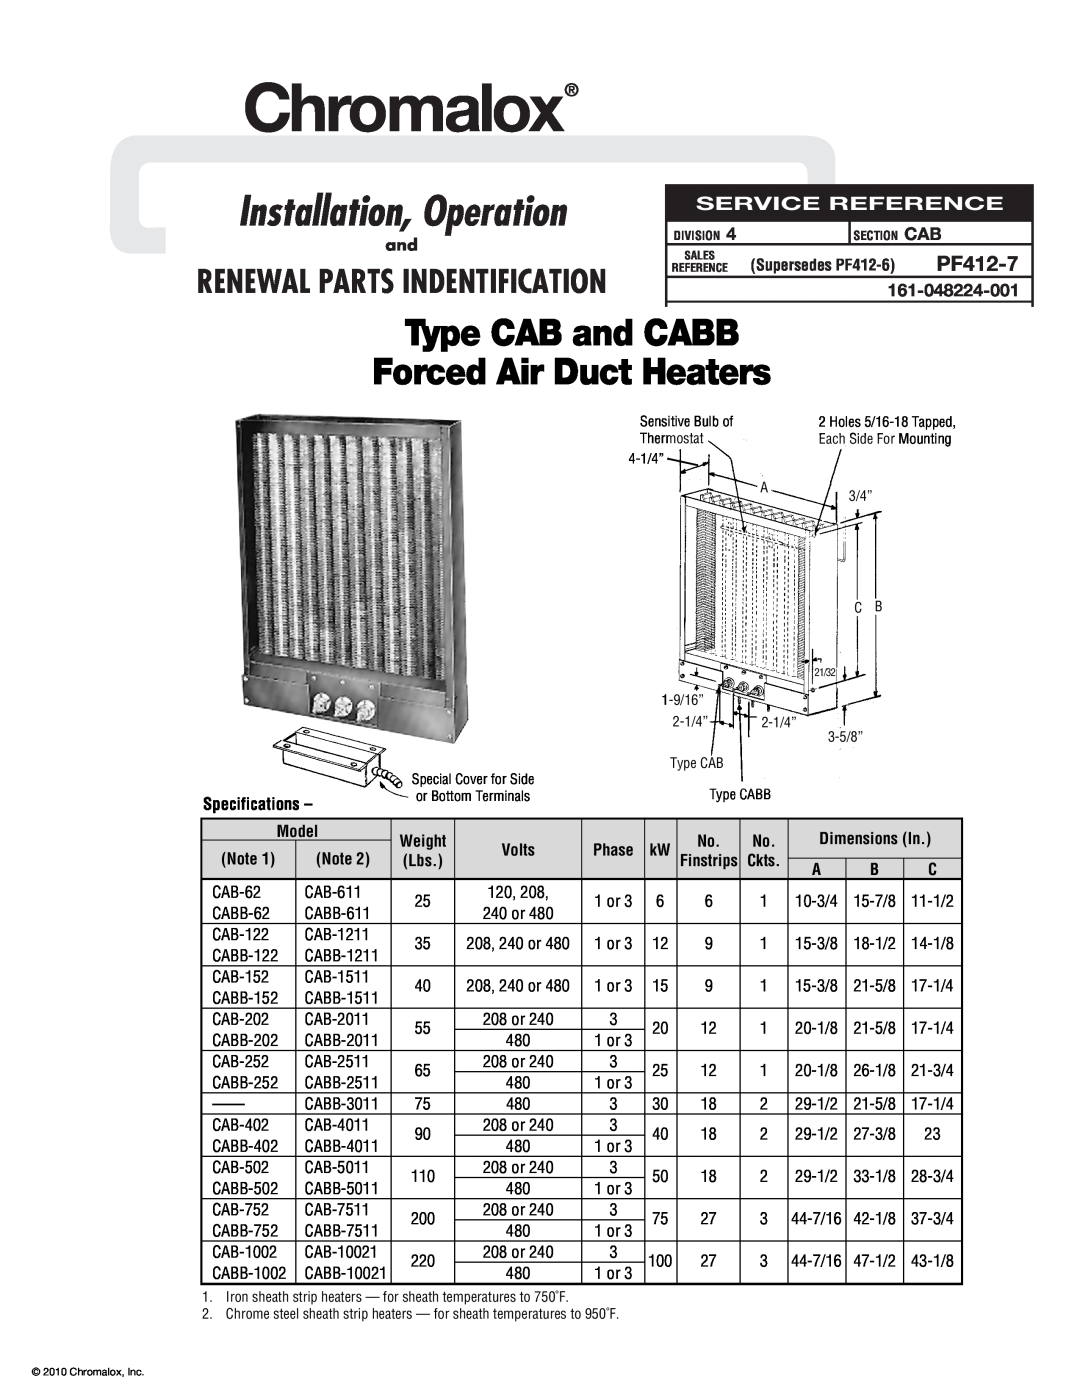 Chromalox specifications Specifications, Chromalox, Installation, Operation, Type CAB and CABB Forced Air Duct Heaters 